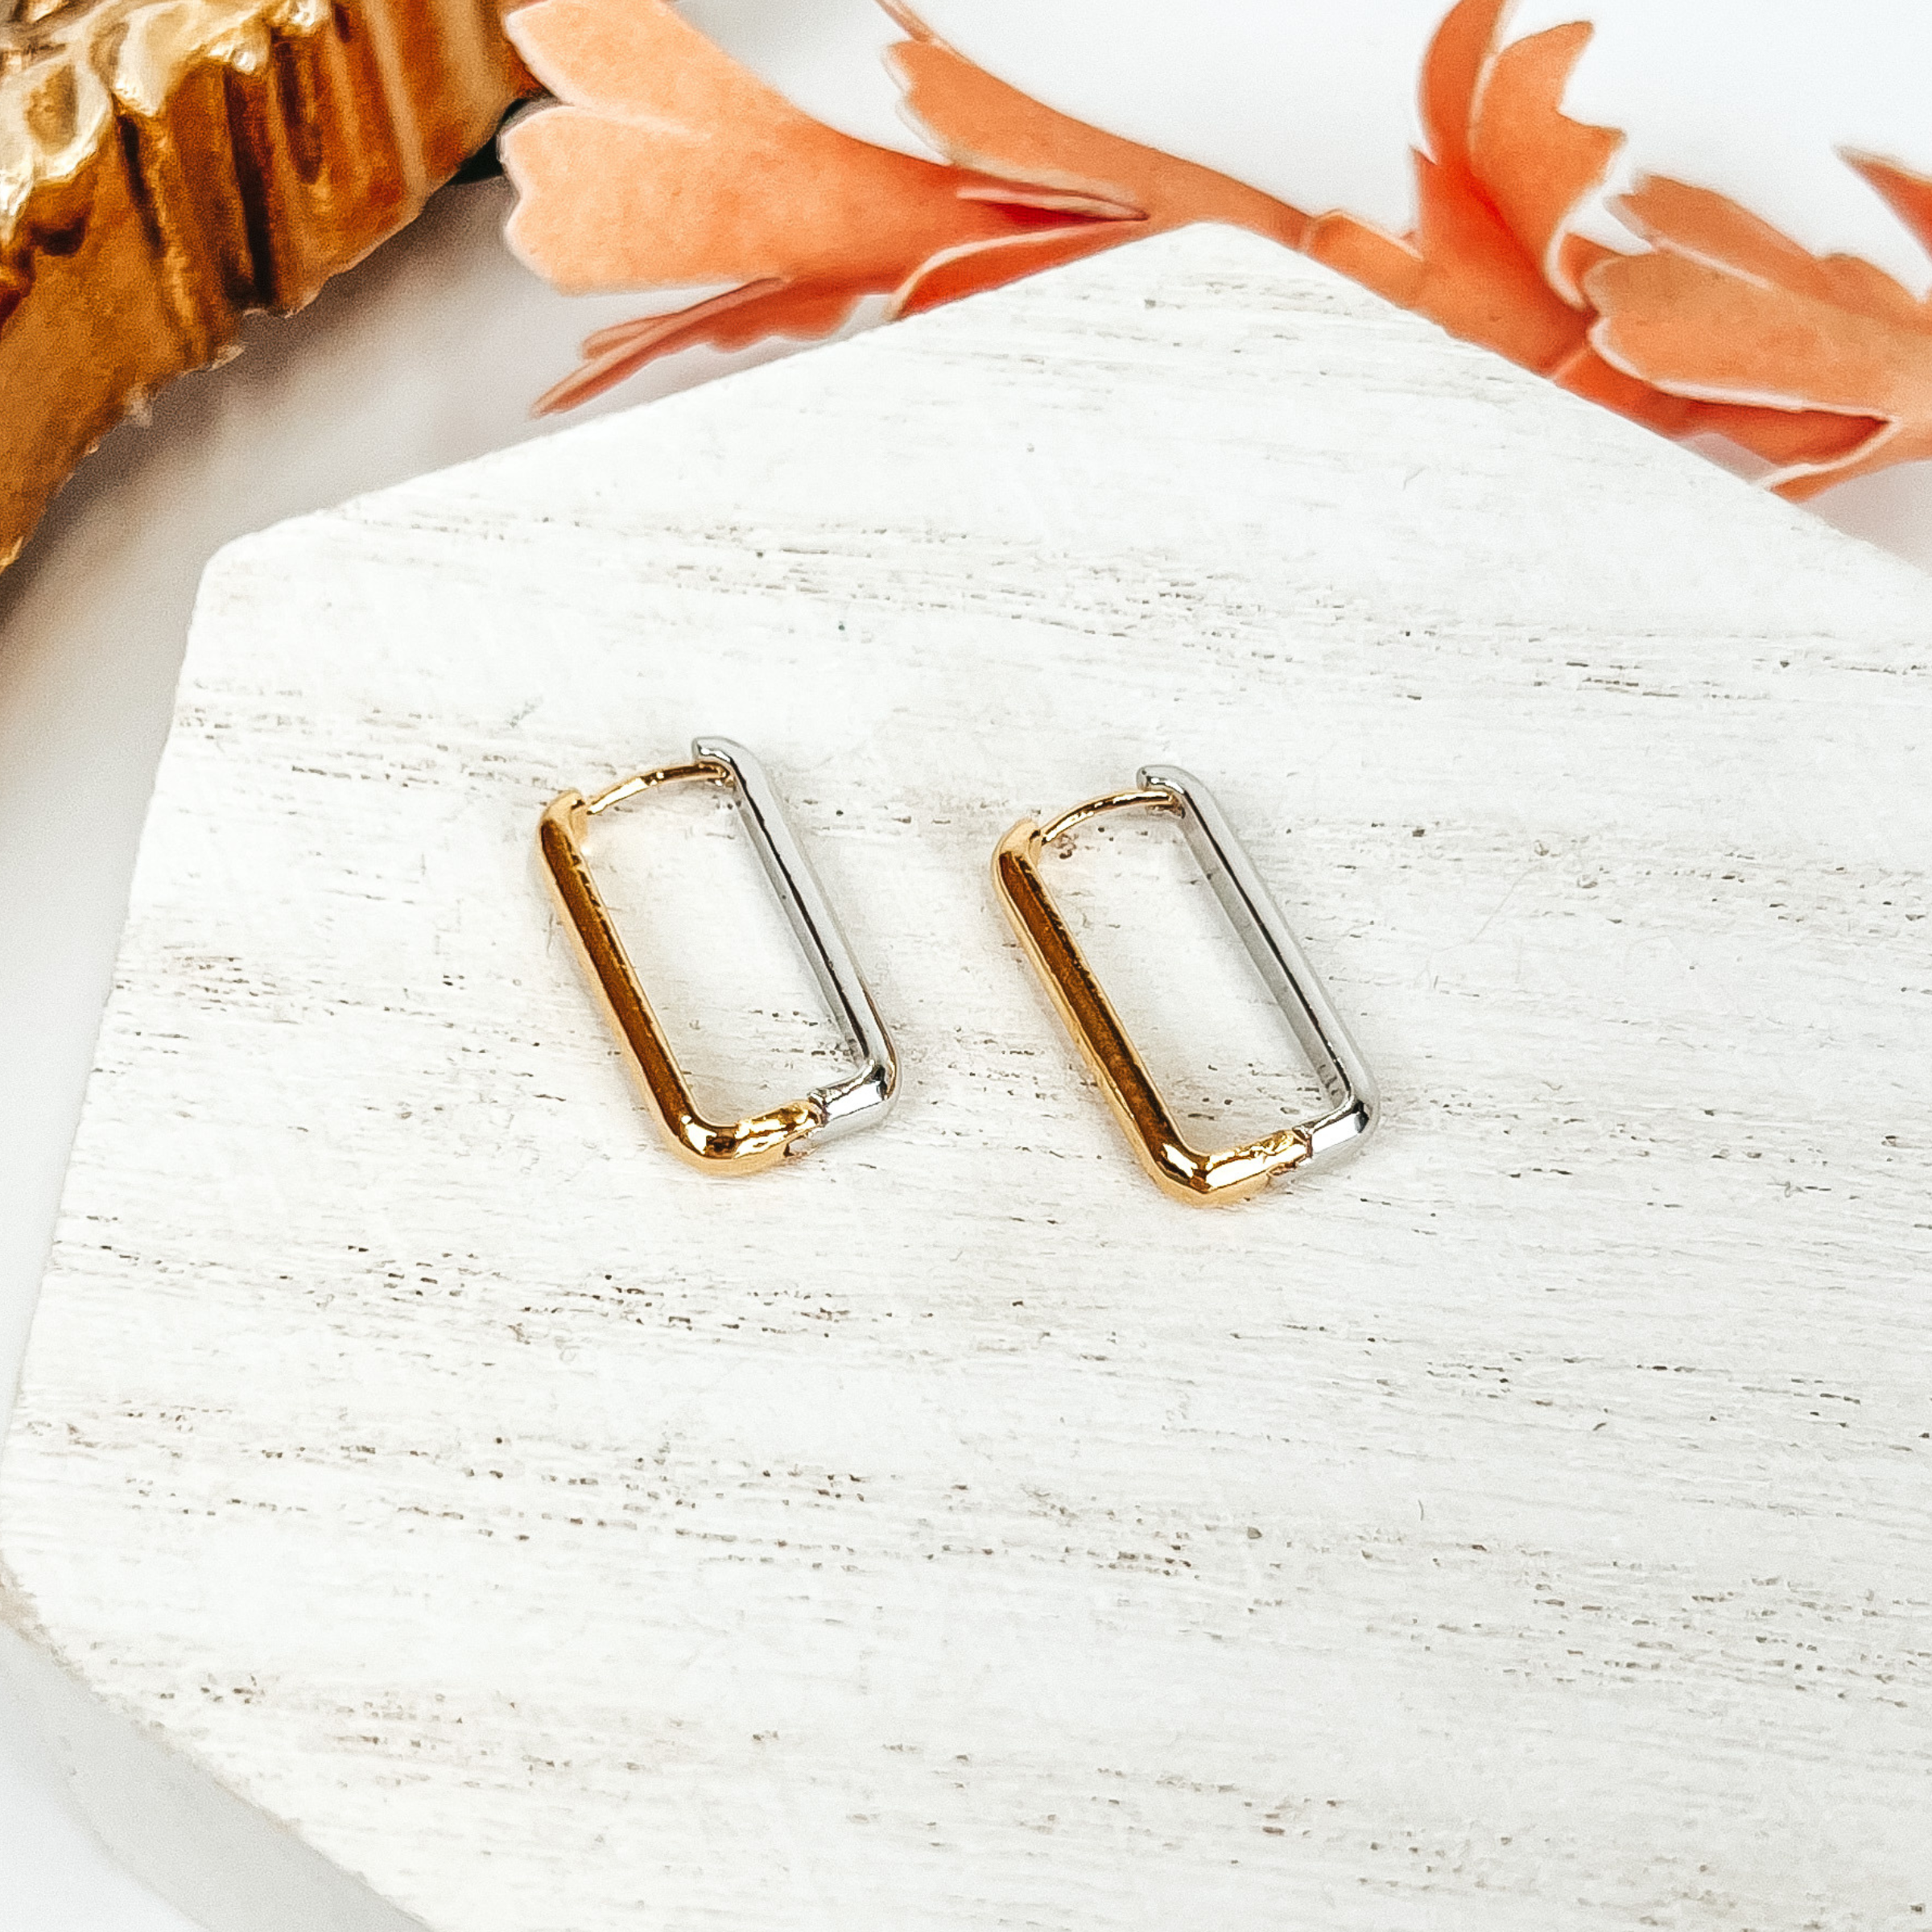 Half gold and half silver rectangle hoop earrings pictured on a white block on a white background. There is also a gold mirror in the top left corner.